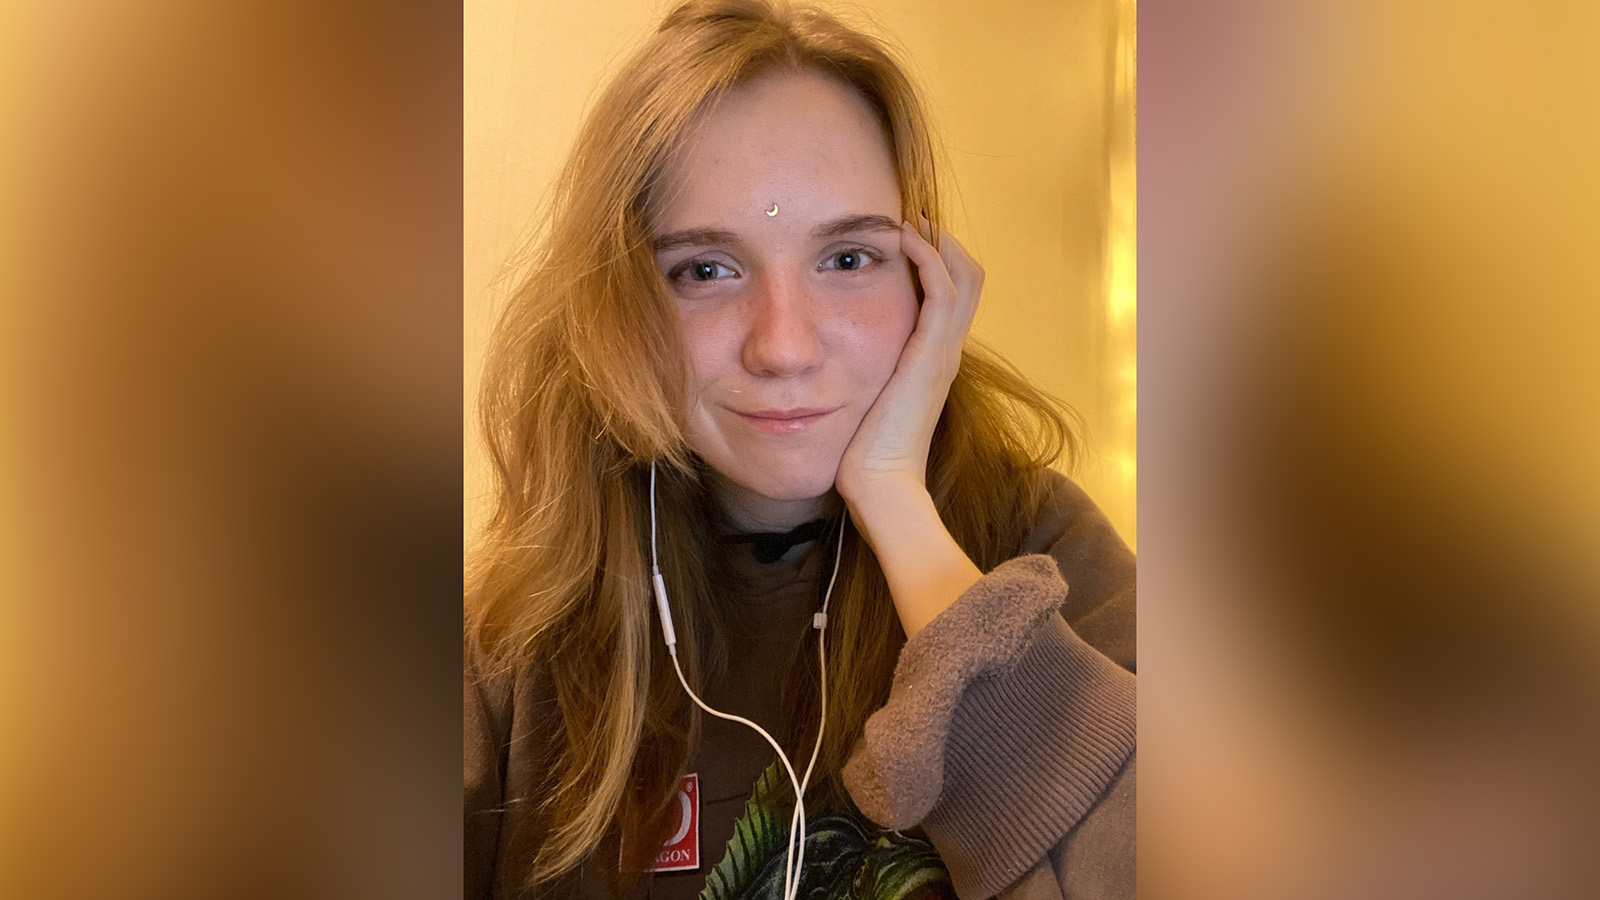 Darya Trepova has been detained in connection with the bombing.